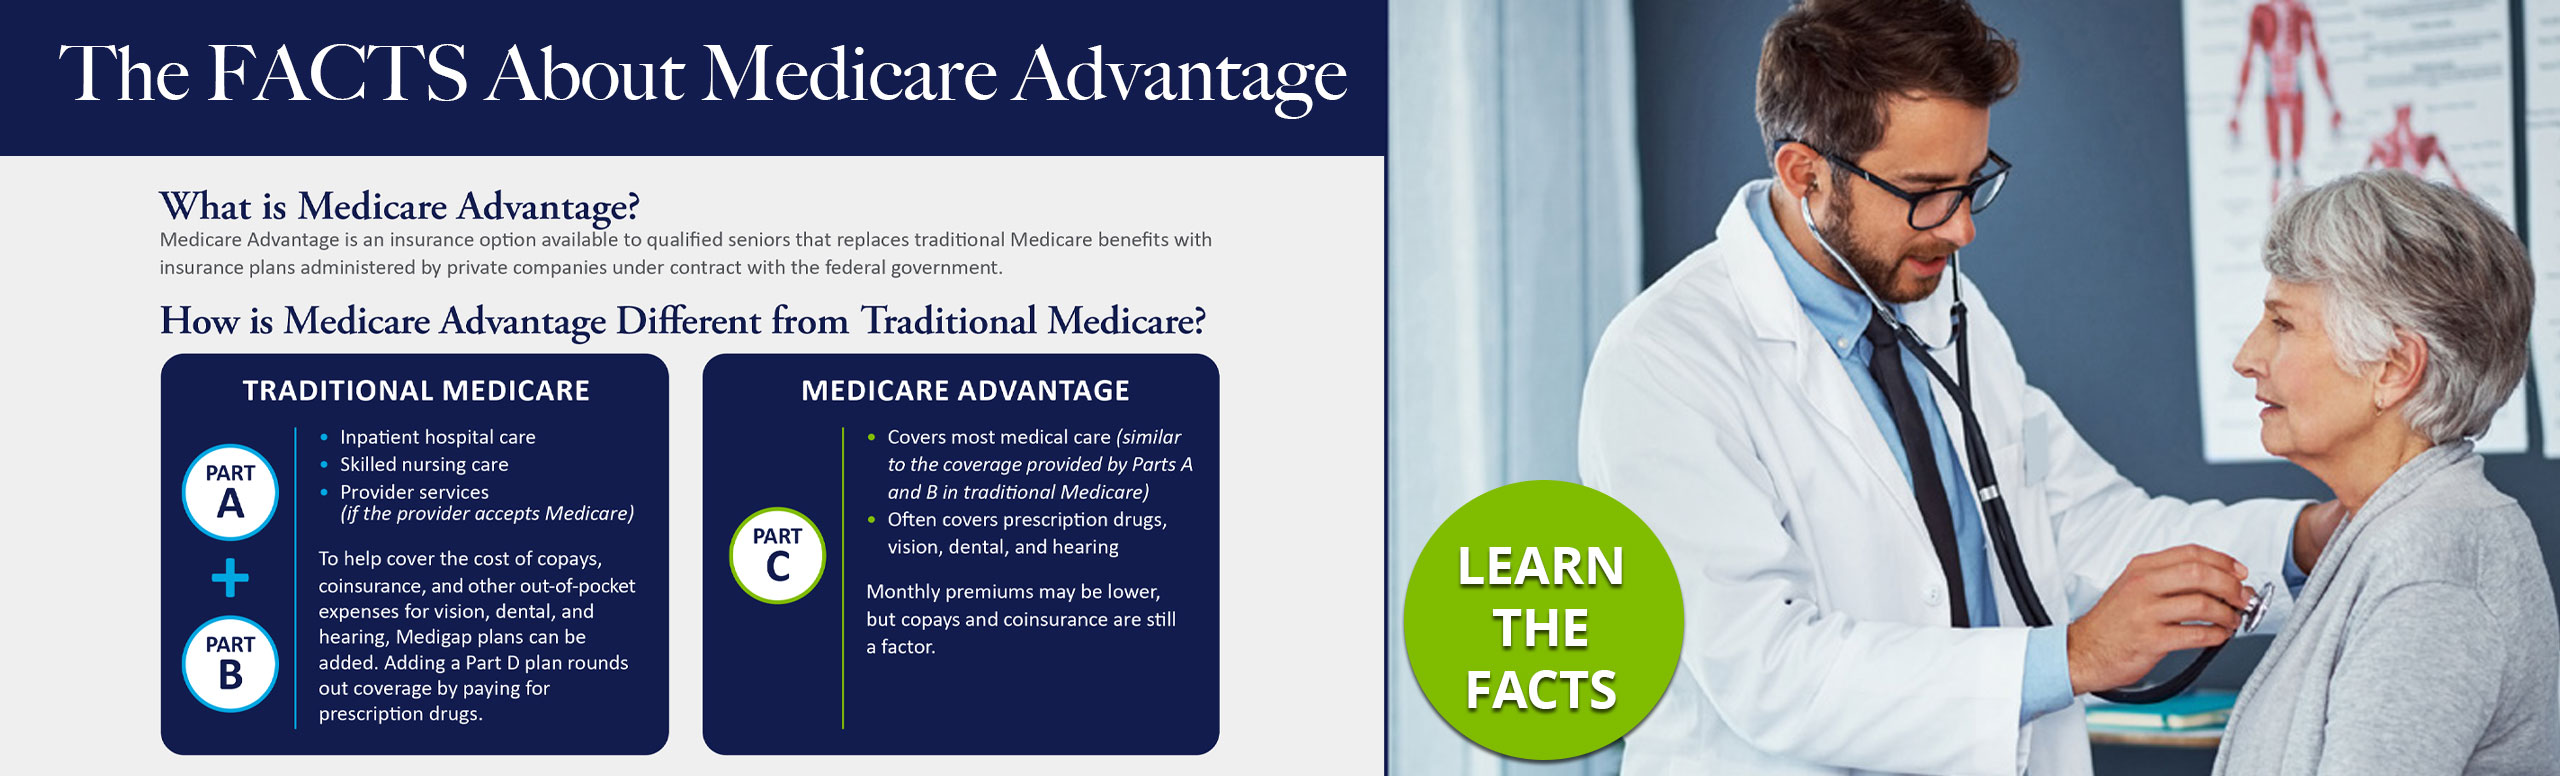 Learning The Facts about Medicare Advantage

What is Medicare Advantage
Medicare Advantage is an insurance option available to qualified seniors that replaces traditional Medicare Benefits with insurance plans administered by private companies under contract with the federal government.

How is Medicare Advantage different from Traditional Medicare 

TRADITIONAL MEDICARE
PART A AND PART B

INPATIENT HOSPICE CARE
SKILLED NURSING CARE
PROVIDER SERVICES IF THE PROVIDER ACCEPTS MEDICARE

To help cover the cost of copays, coinsurance, and other out-of-pocket expenses for vision, dental, and hearing, Medigap plans can be added. Adding a Part D plan rounds out coverage by paying prescription drugs.


Medicare Advantage 



What is Medicare Advantage?
Medicare Advantage is an insurance option available to qualified seniors that replaces traditional Medicare benefits with insurance Plans administered by private companies under contract with the federal government.

How is Medicare Advantage Different from Traditional Medicare?
Part A and Part B
TRADITIONAL MEDICARE 
Inpatient Hospital Care
Skilled Nursing Care
Provider Services if the provider accepts Medicare


To help cover the cost and copays, coinsurance, and other out of pocket expenses for vision, dental, and hearing. Medigap plans can be added. Adding a part D plan rounds out coverage by paying for prescription Drugs.

Part C
Medicarte Advantage
Covers most medical care similar to the coverage provided by Parts A and B in traditional medicare.
Often covers prescription drugs, vision, dental, and hearing.

Monthly premiums may be lower, but copays and coinsurance are still a factor.